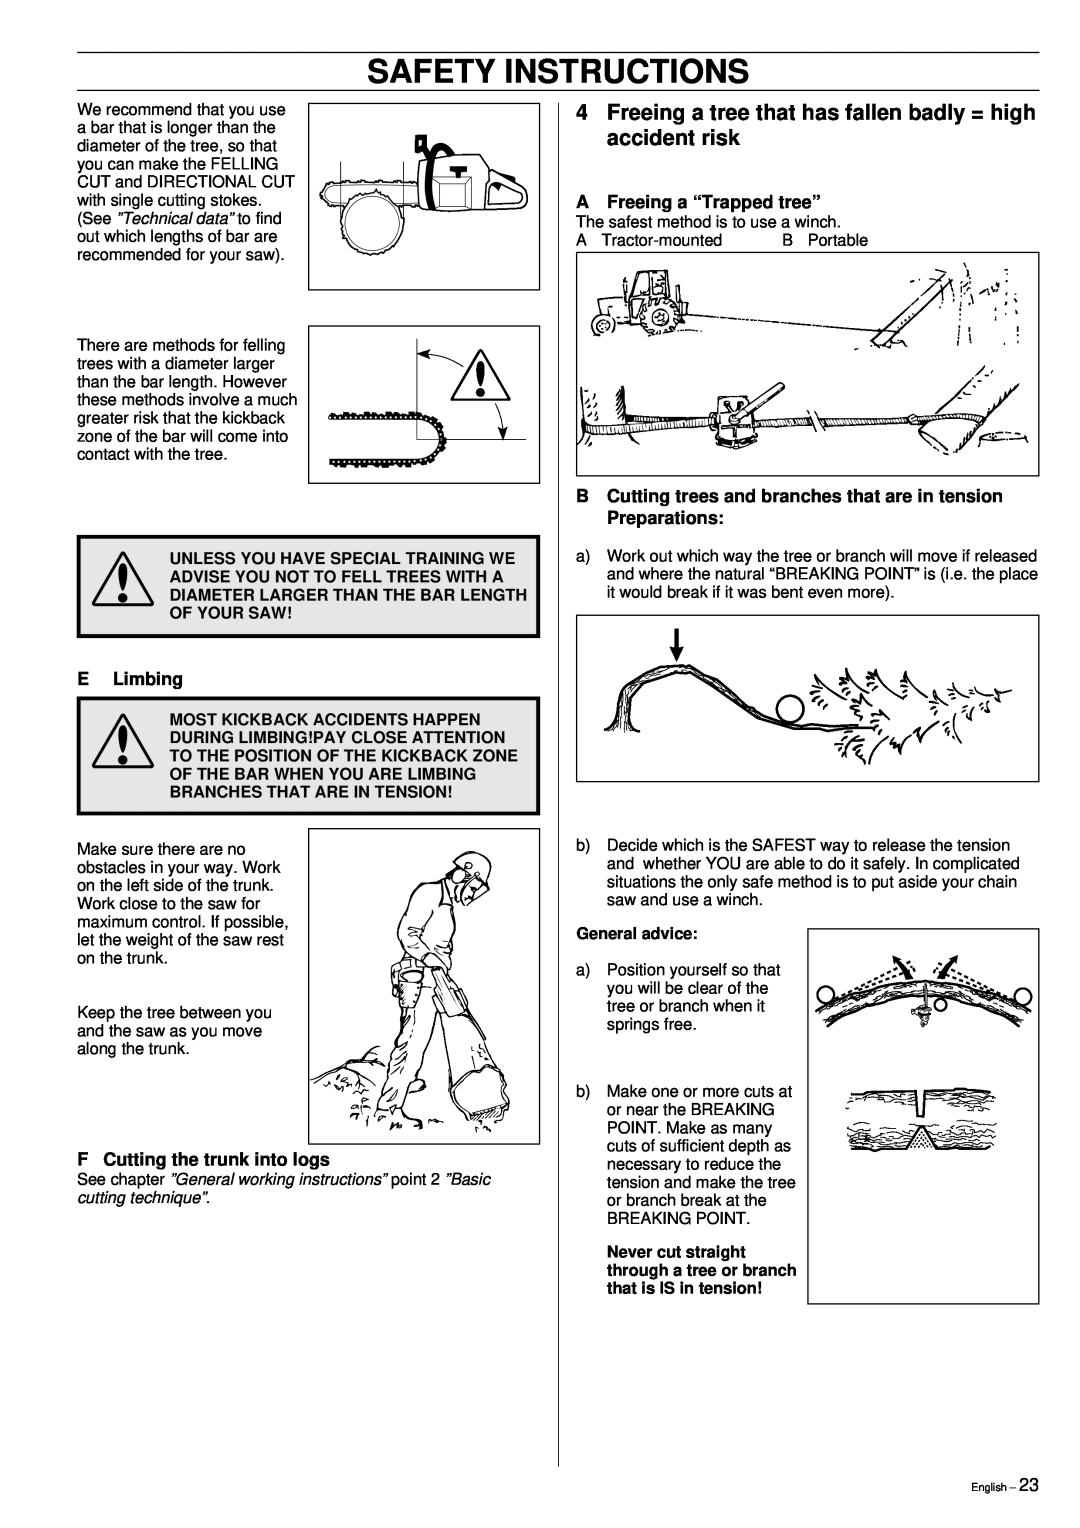 Husqvarna 61, 268, 272XP manual Safety Instructions, E Limbing, F Cutting the trunk into logs, AFreeing a “Trapped tree” 